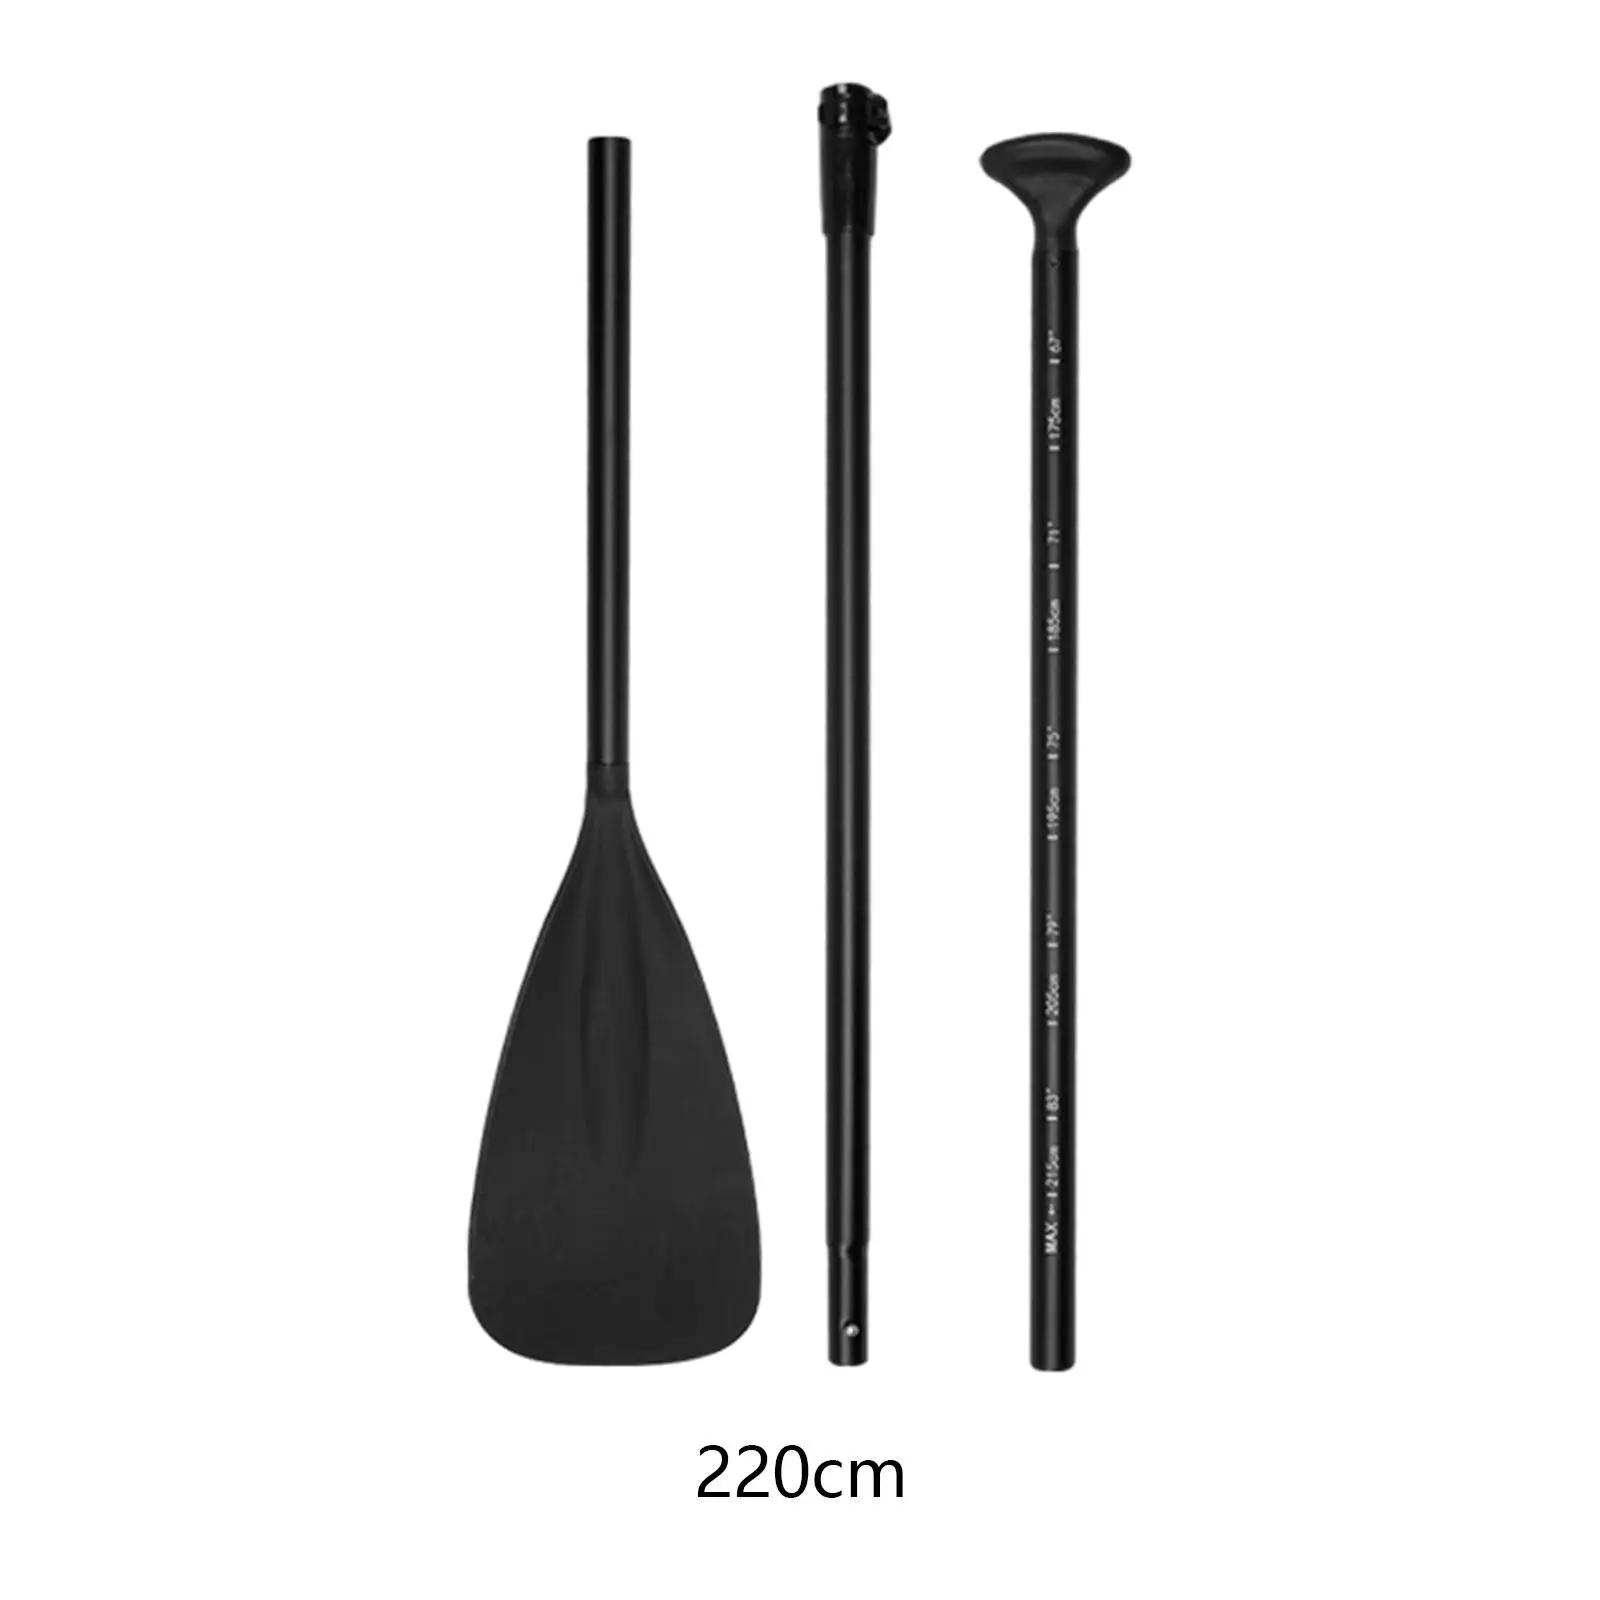 Kayak Paddles Boat Paddle Detachable Paddle Board Paddles for Rafting, Rubber